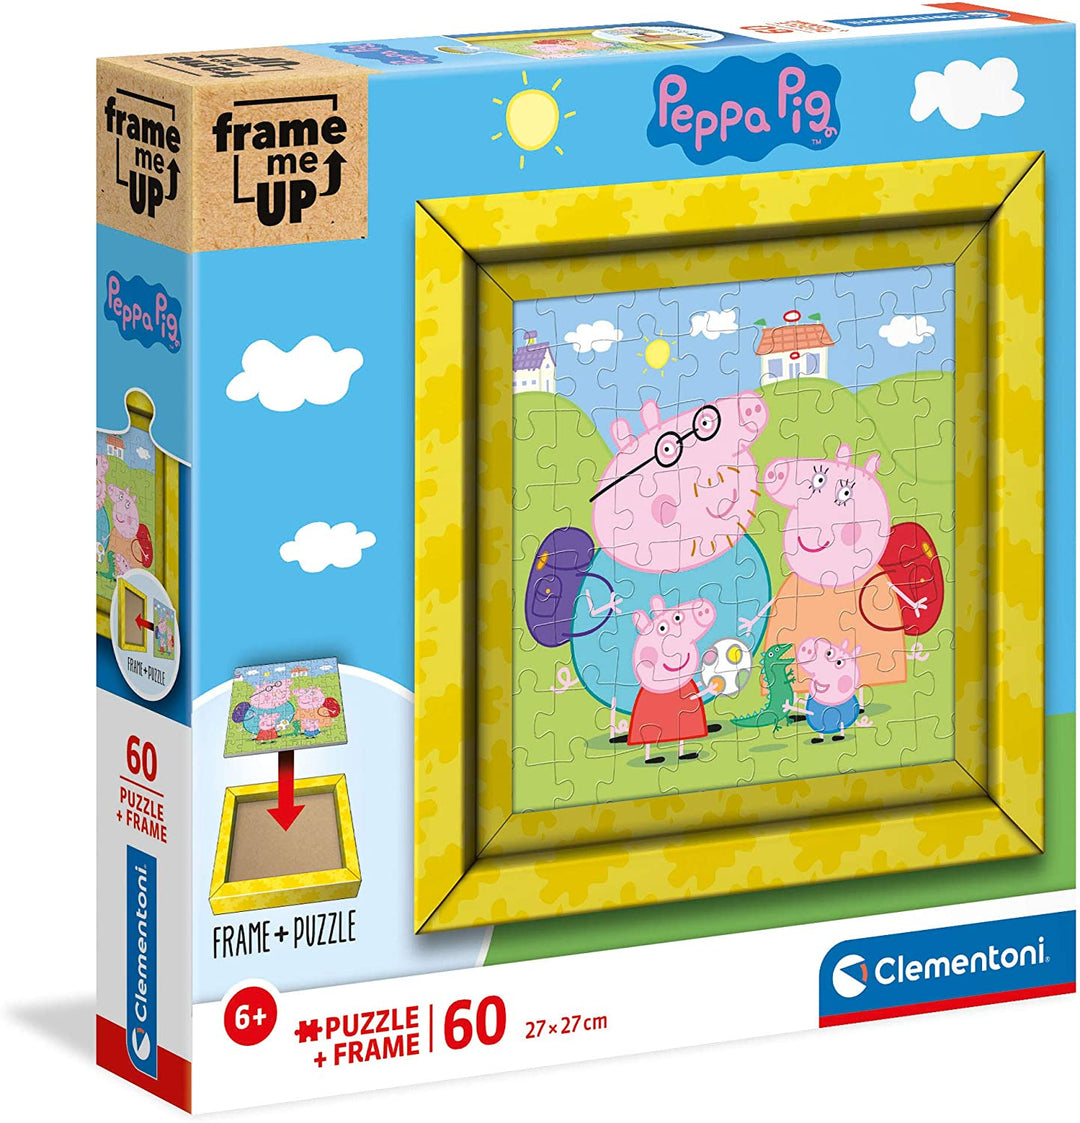 Clementoni 38809, Peppa Pig Frame Me Up Puzzle for Children - 60 Pieces, Ages 6